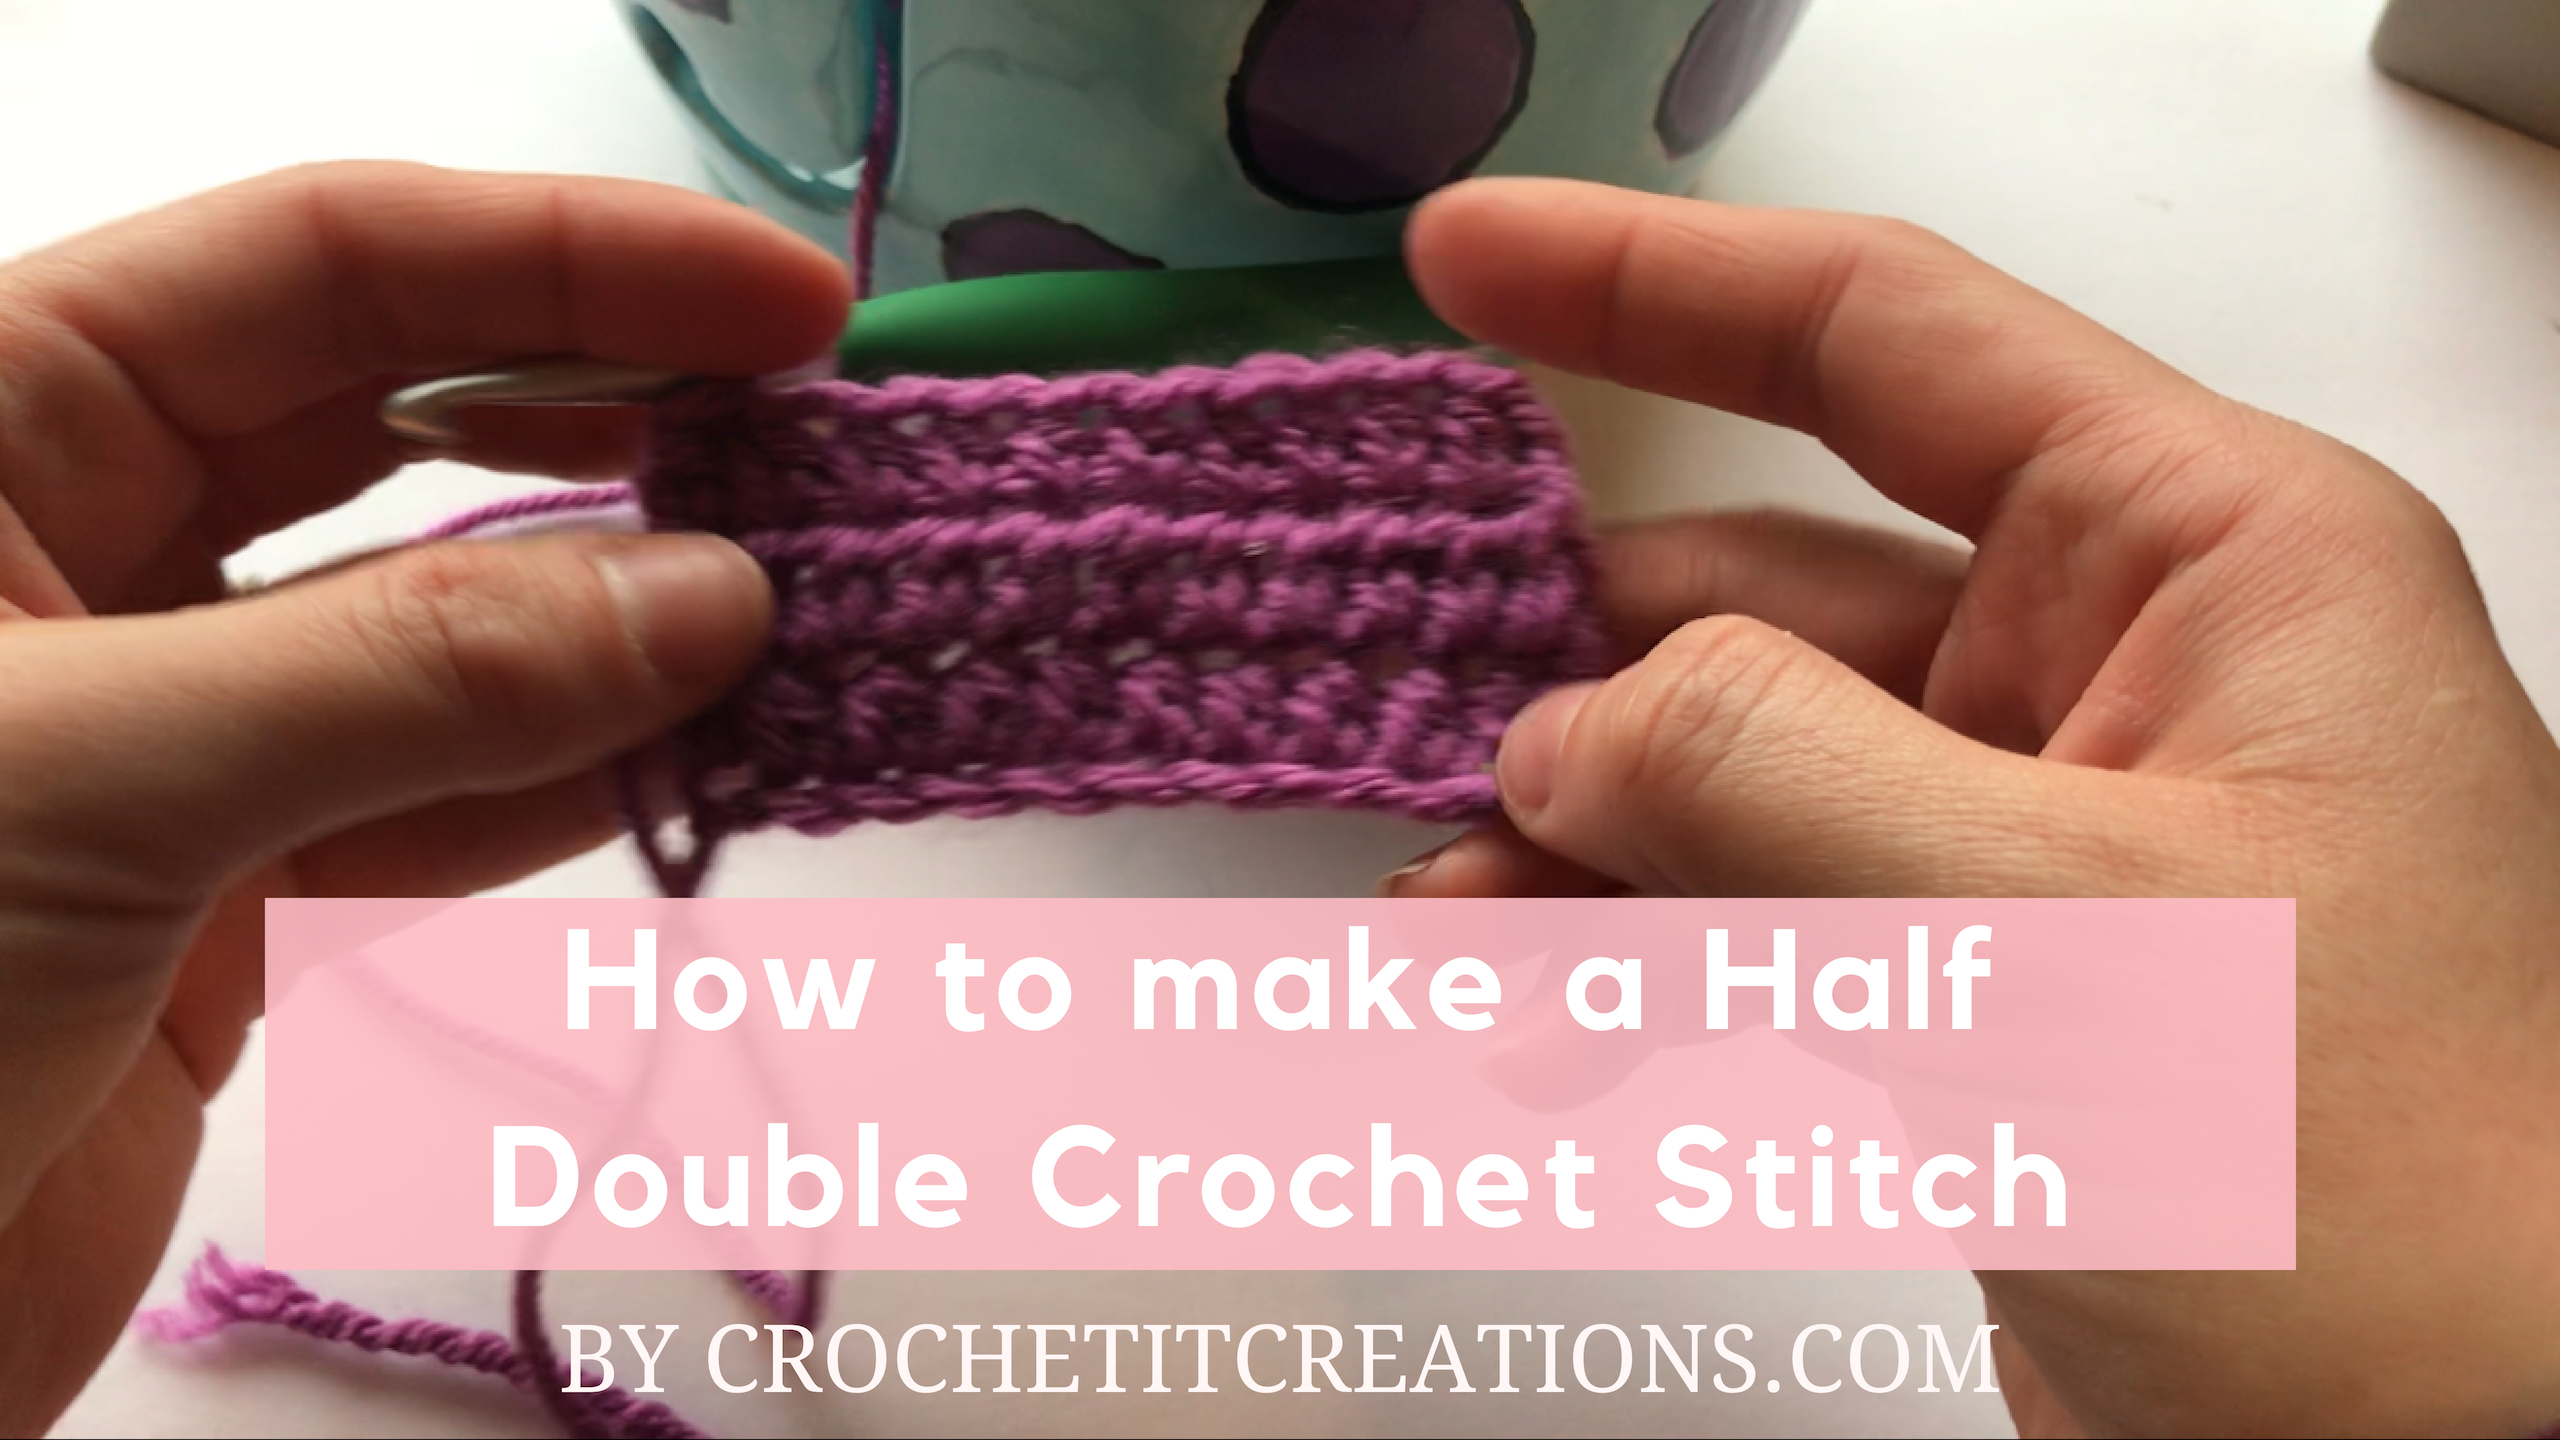 Learn how to make the half double crochet stitch